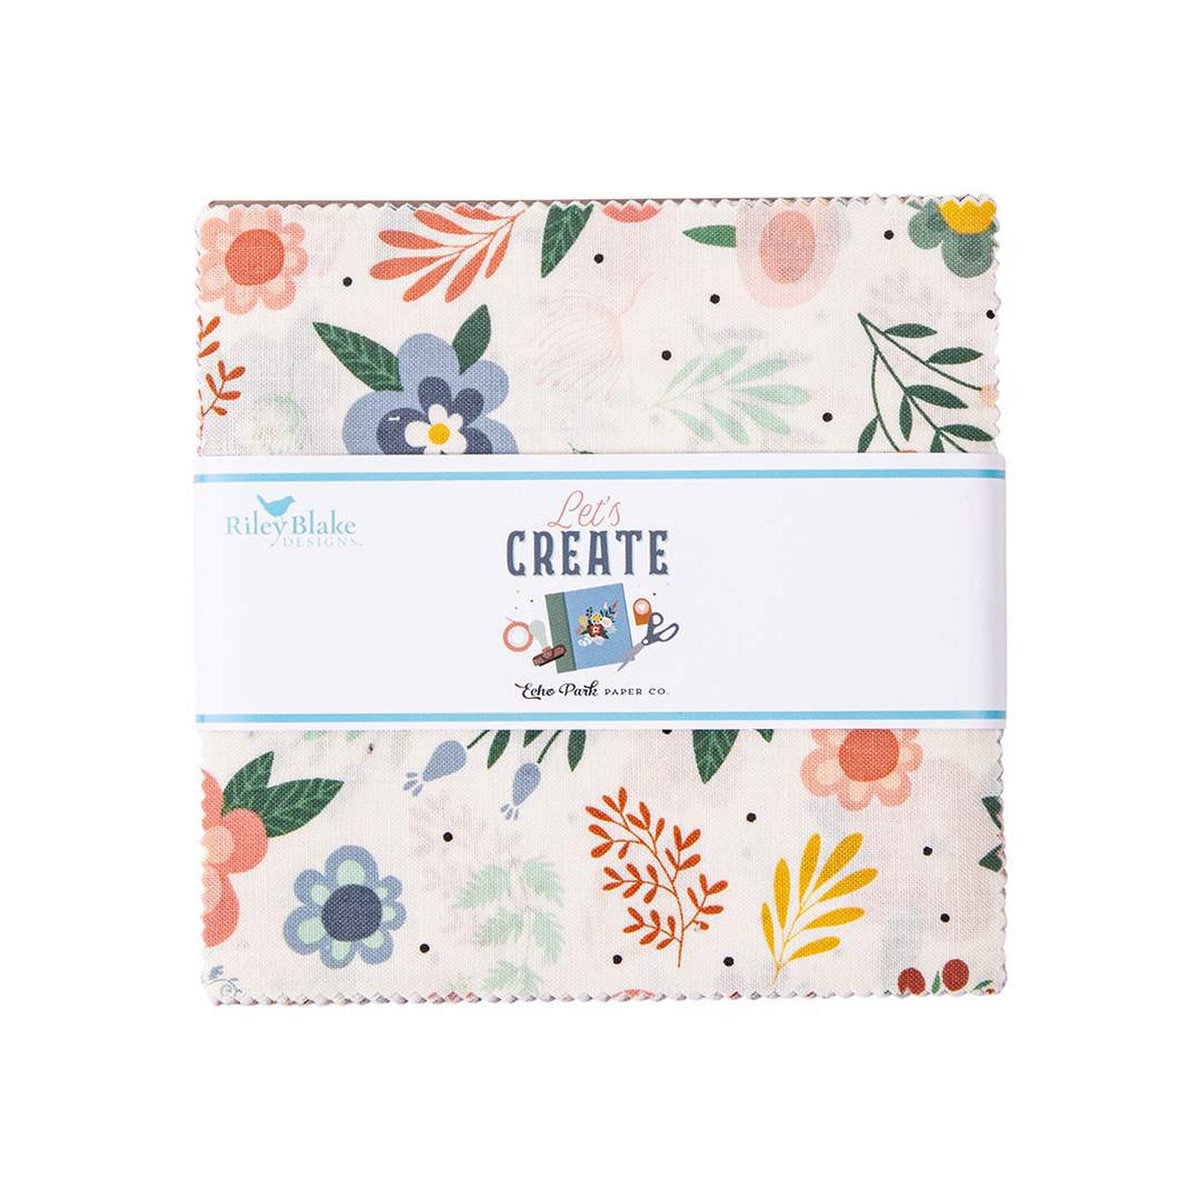 Let's Create 5" Stacker Charm Pack - Riley Blake Designs 5-13690-42, Sewing Themed Charm Pack, Teal and Pink Floral Charm Pack